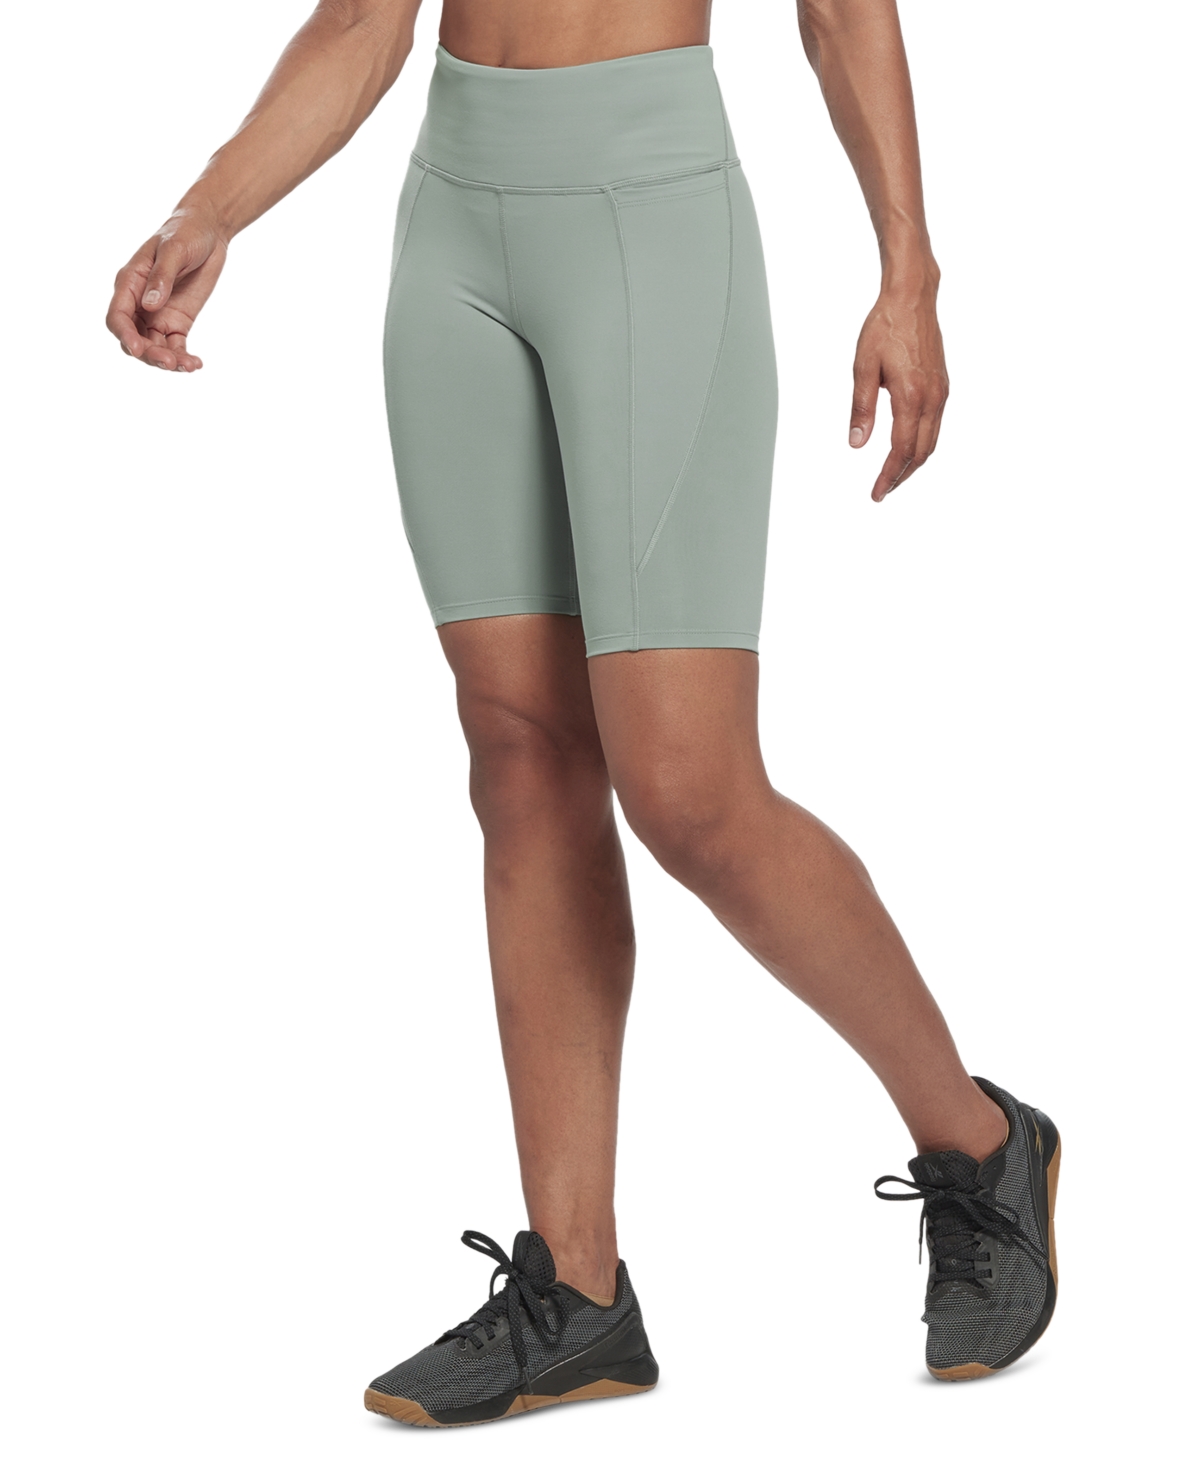 REEBOK WOMEN'S LUX HIGH-RISE PULL-ON BIKE SHORTS, A MACY'S EXCLUSIVE